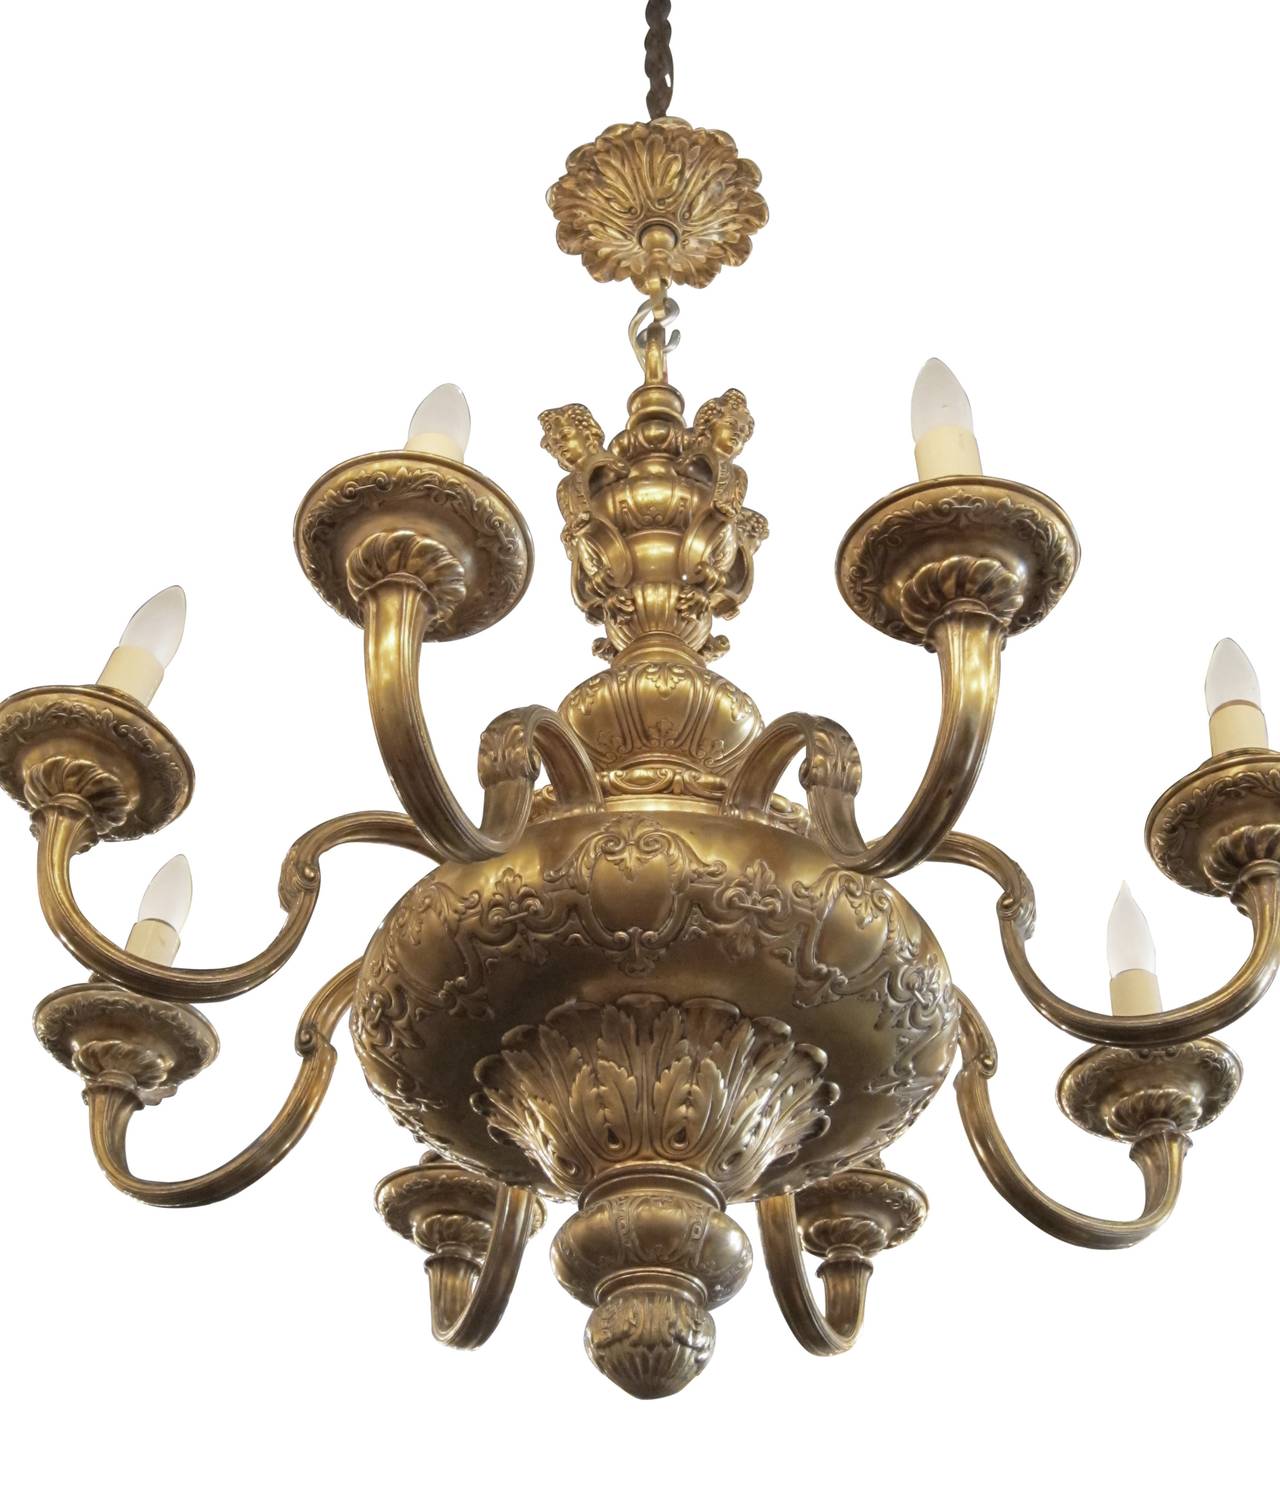 Gold-plated eight-arm chandelier with relief work on main well, cherubic figures on top well, and highly detailed work on finial. French made from the 1900s. This can be seen at our 2420 Broadway location on the upper west side in Manhattan.